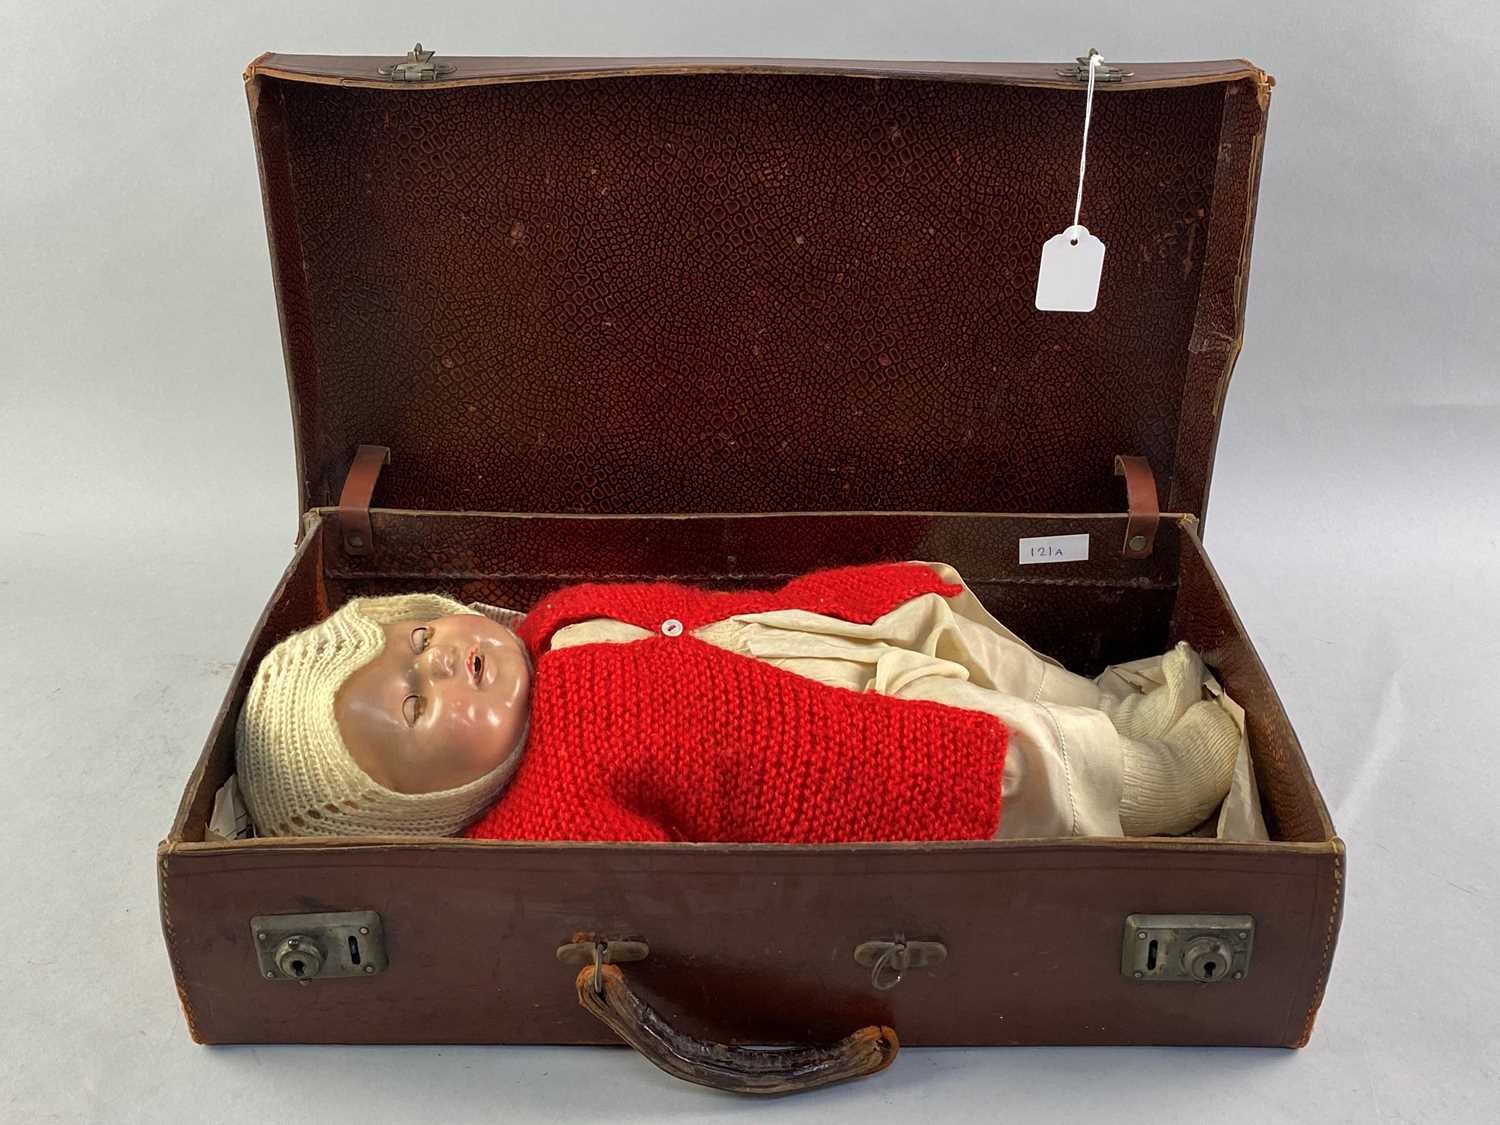 Lot 121 - A CHILD'S VINTAGE DOLL AND A VINTAGE SUITCASE